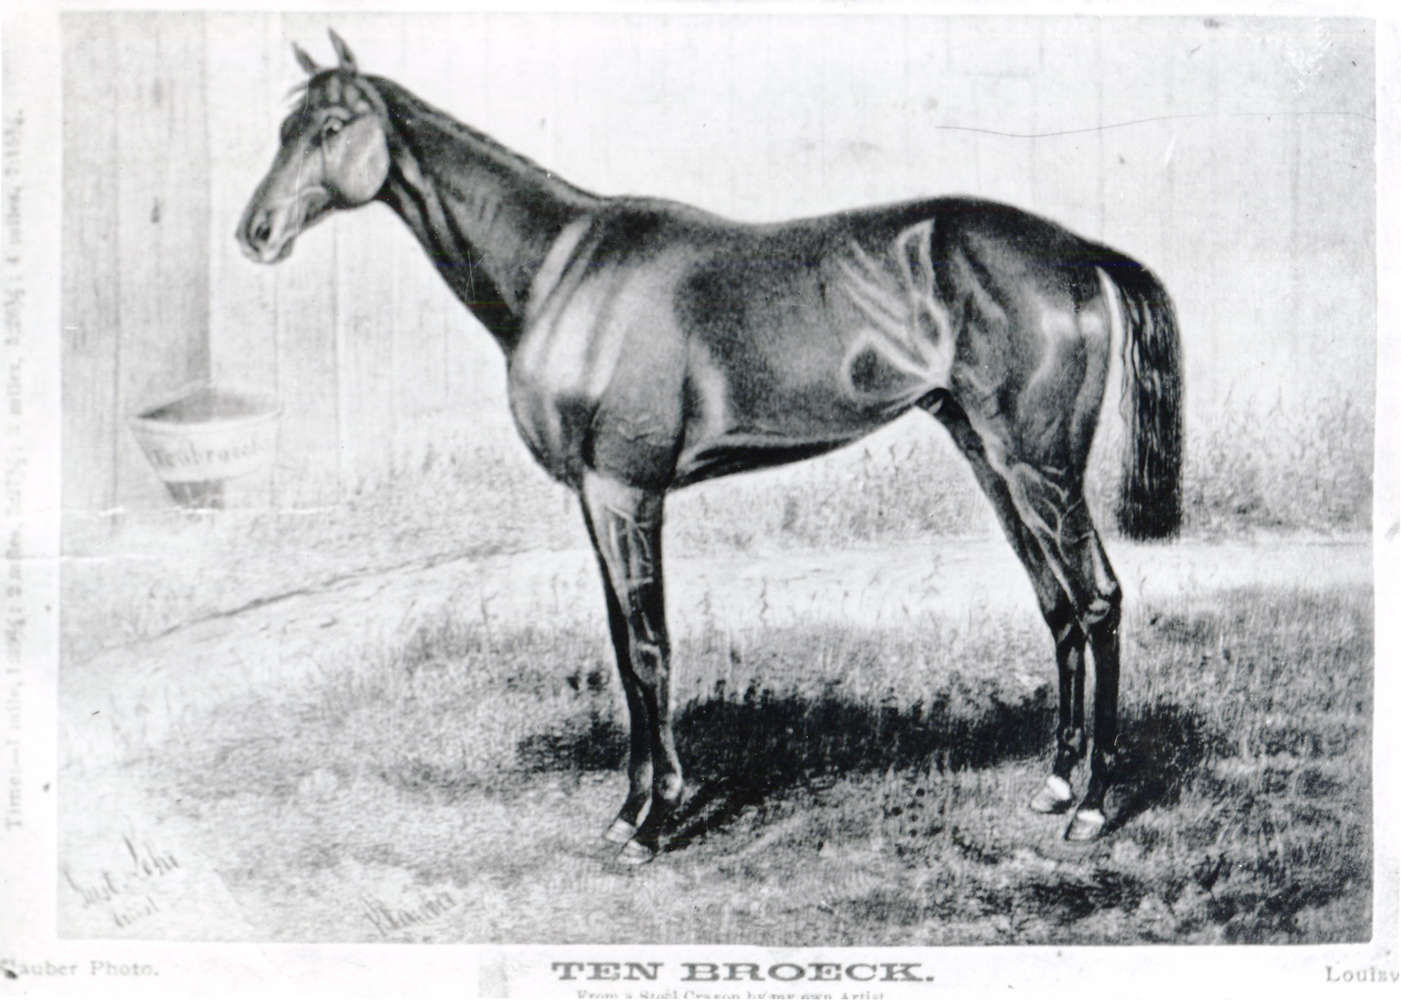 Portrait of Ten Broeck (Keeneland Library McClure Collection/Musuem Collection)